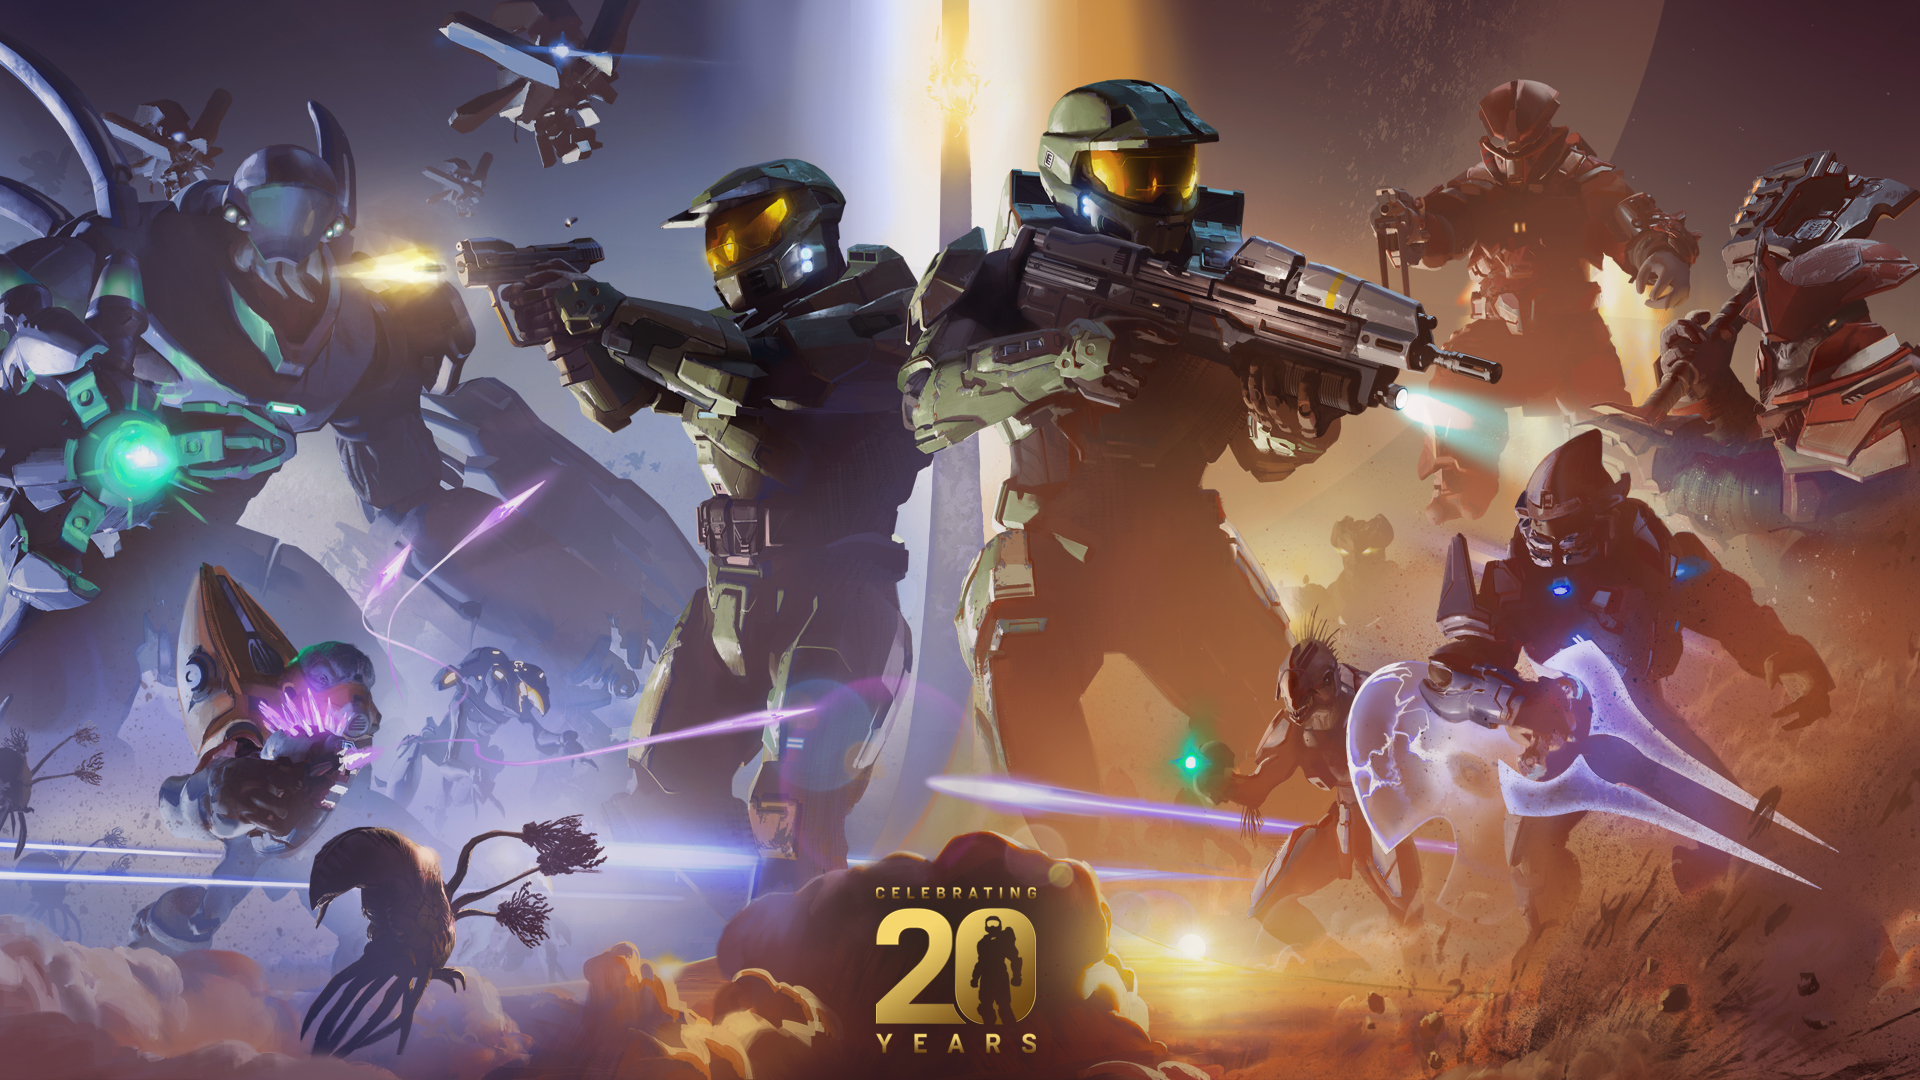 %2F20%20Years%20of%20Xbox%20-%20Halo%2Fxboxone.png